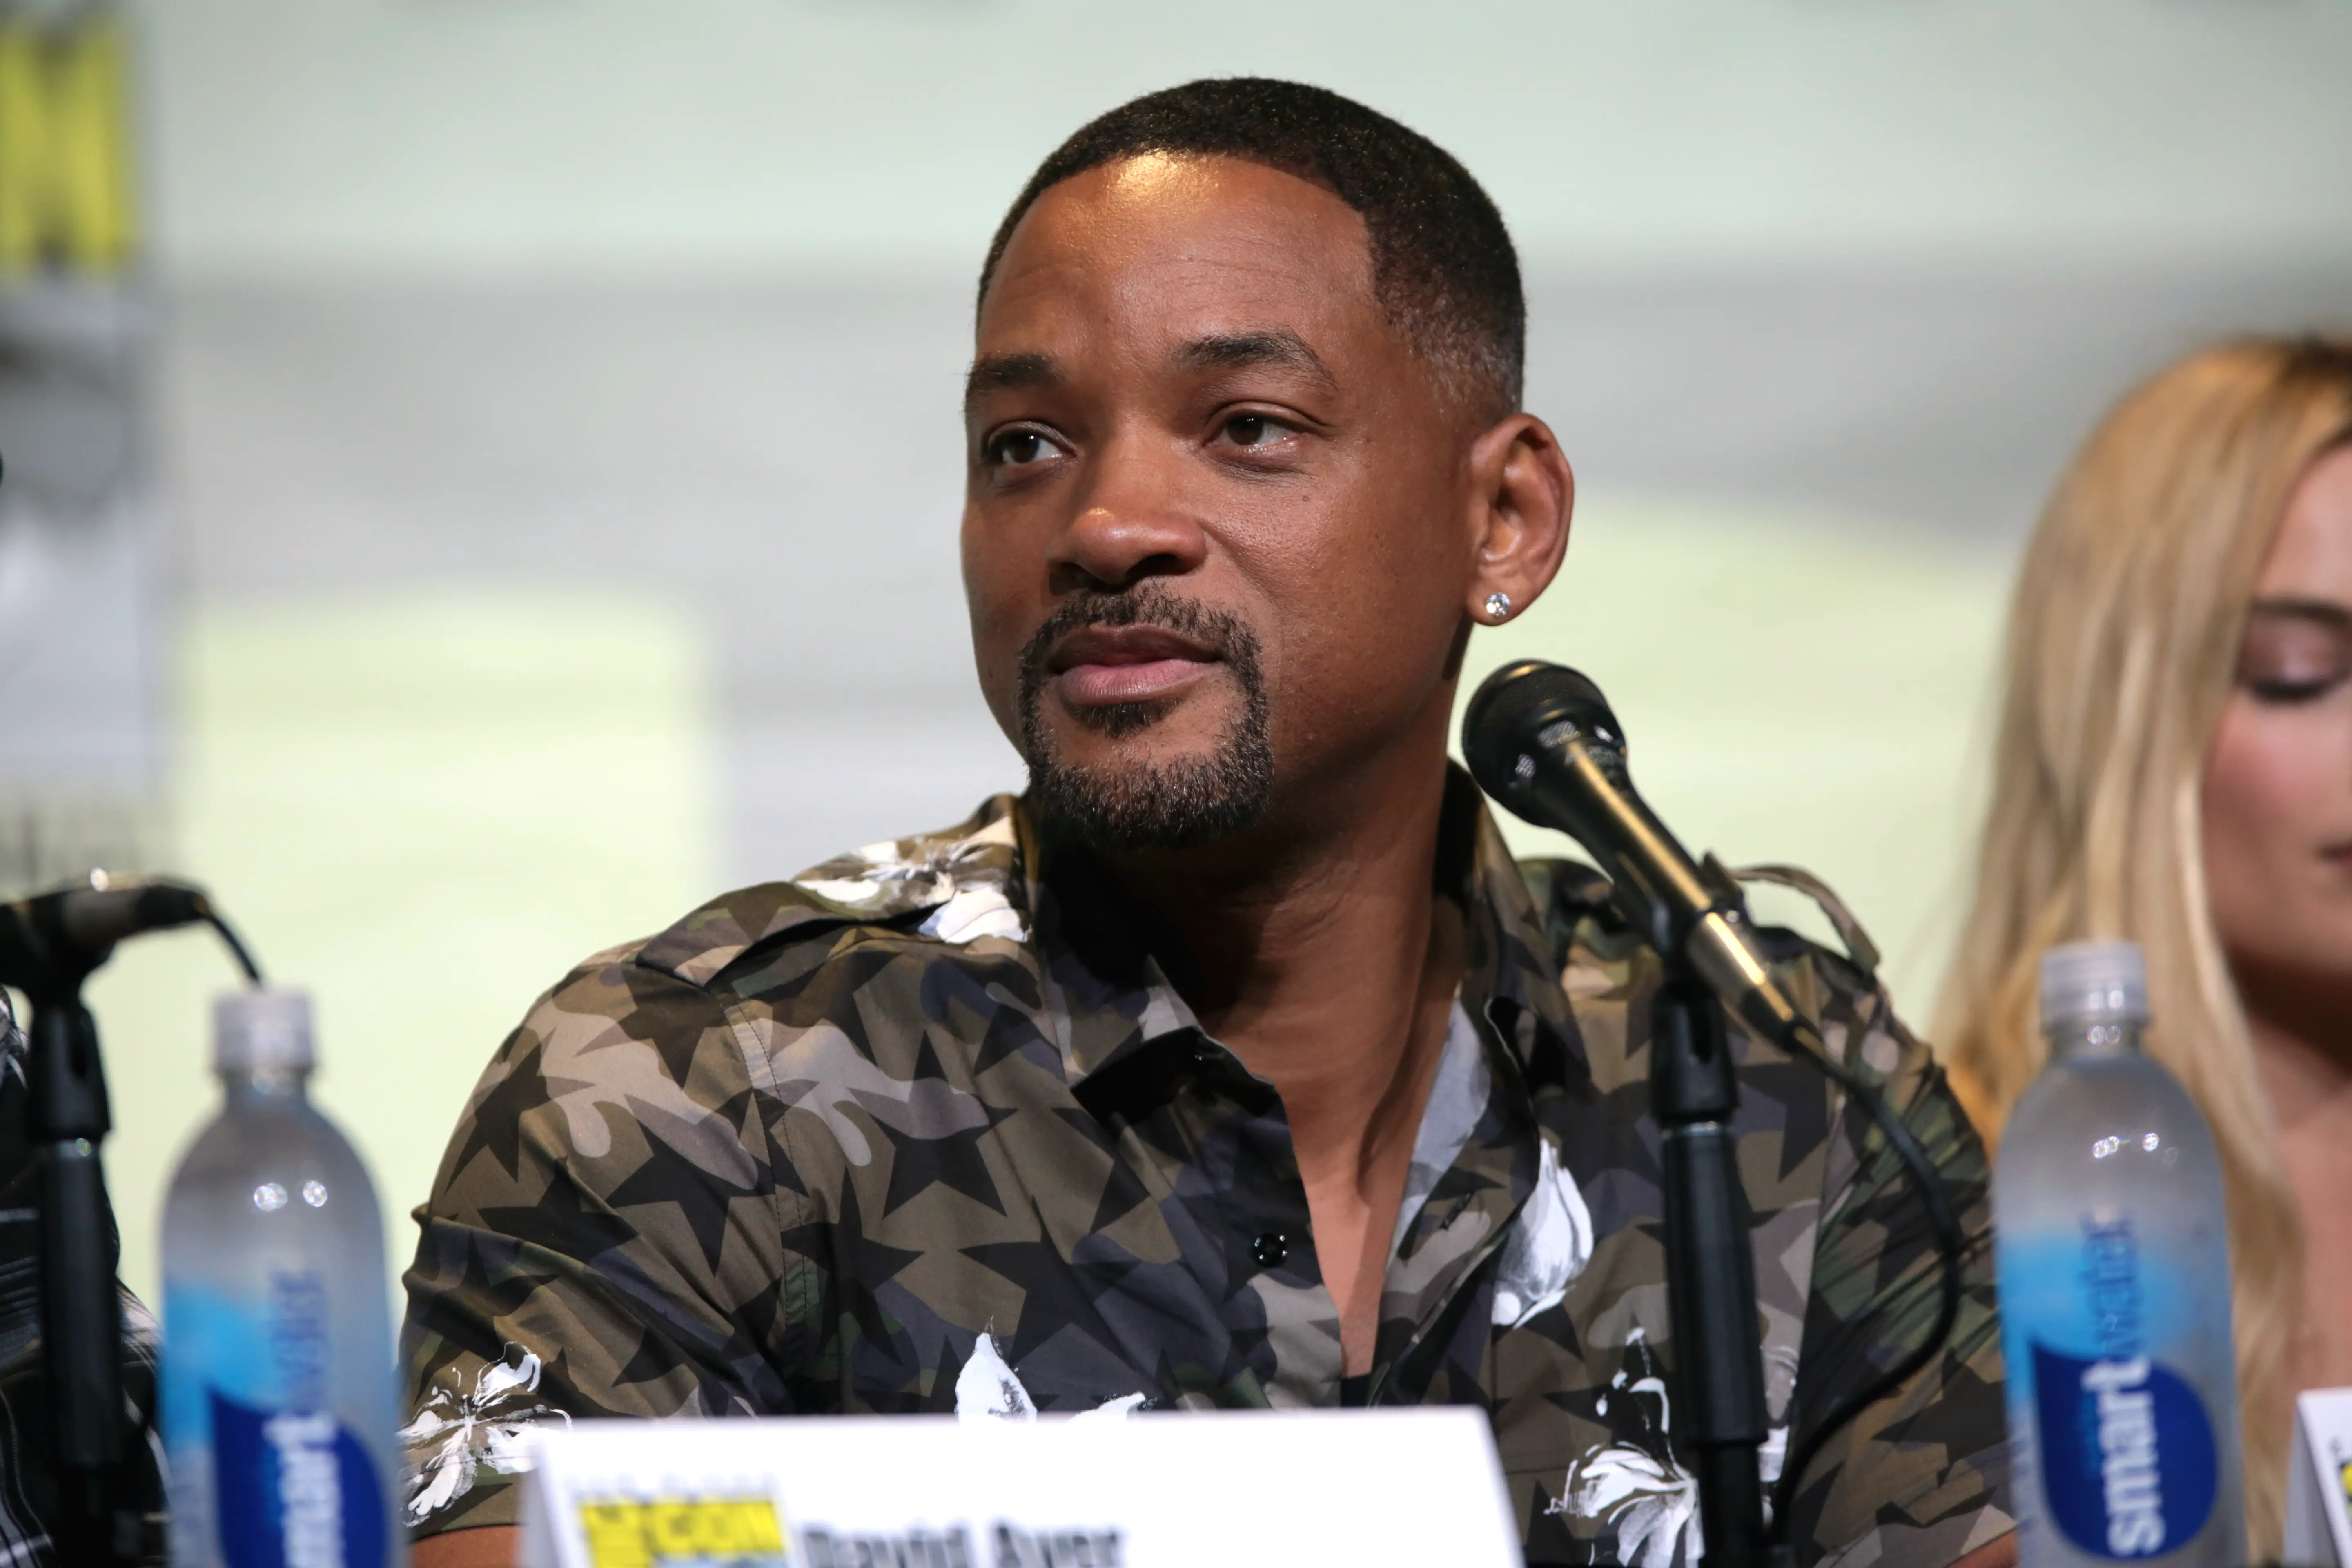 50 Powerful & Life-Changing Will Smith Quotes